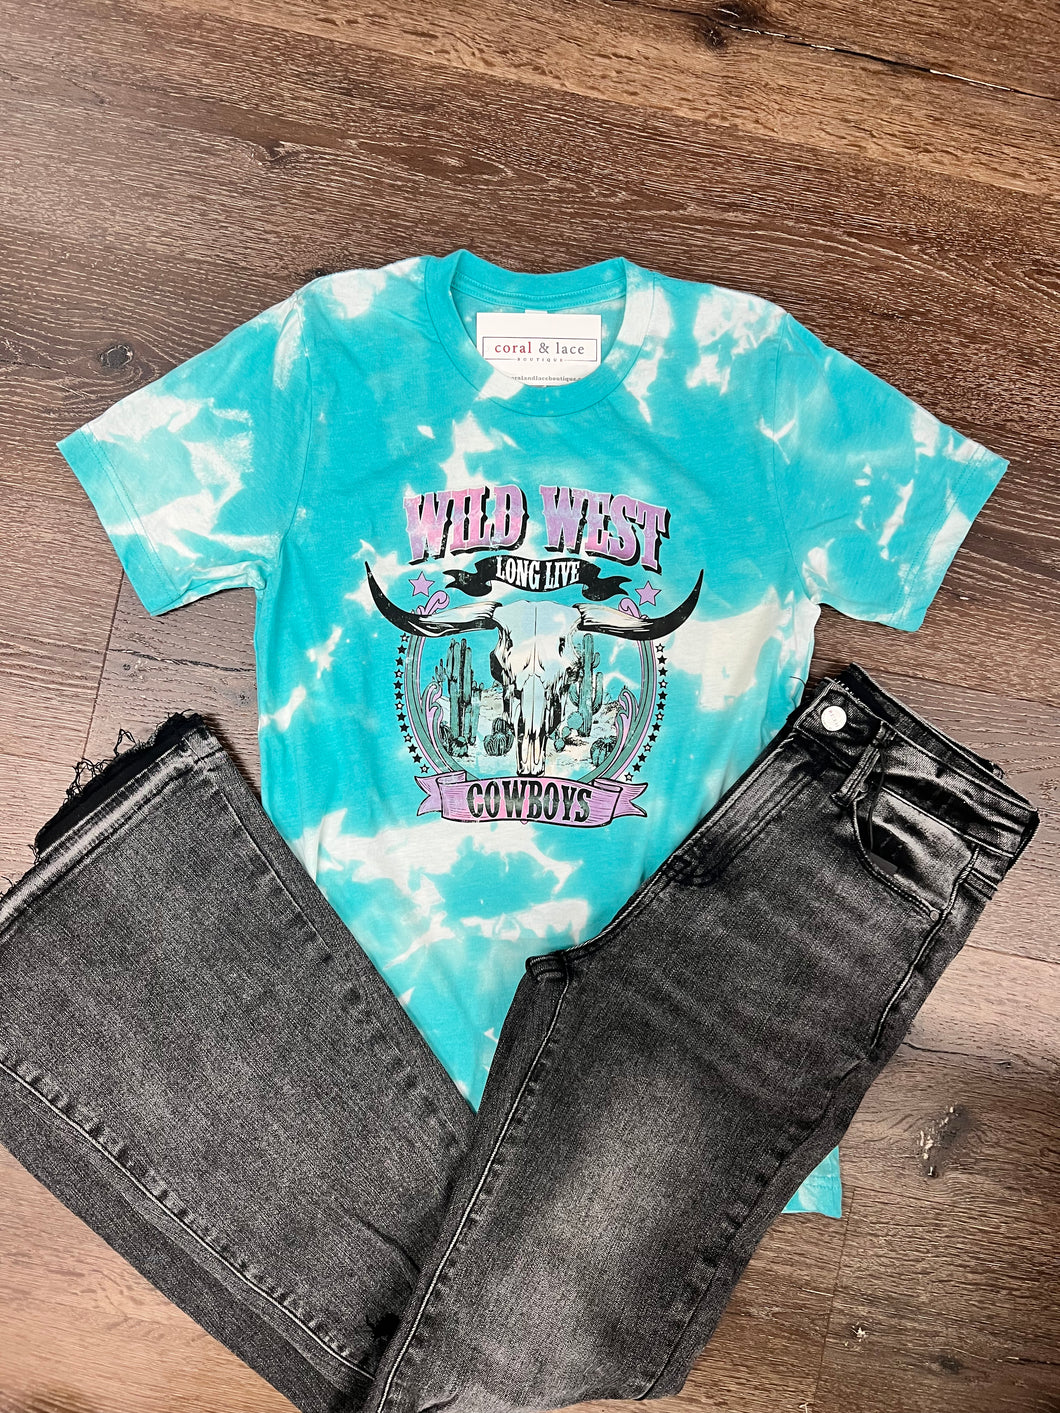 Wild West Long Live Cowboys Graphic Tee